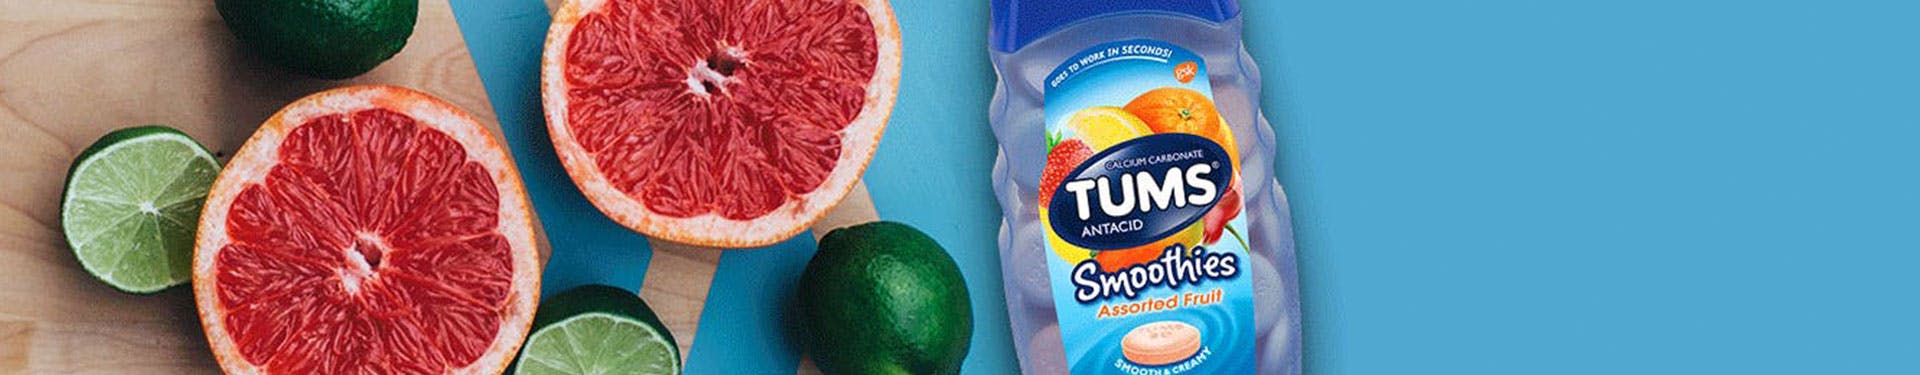 Image of a bottle of TUMS Smoothies Product along with cut oranges and limes